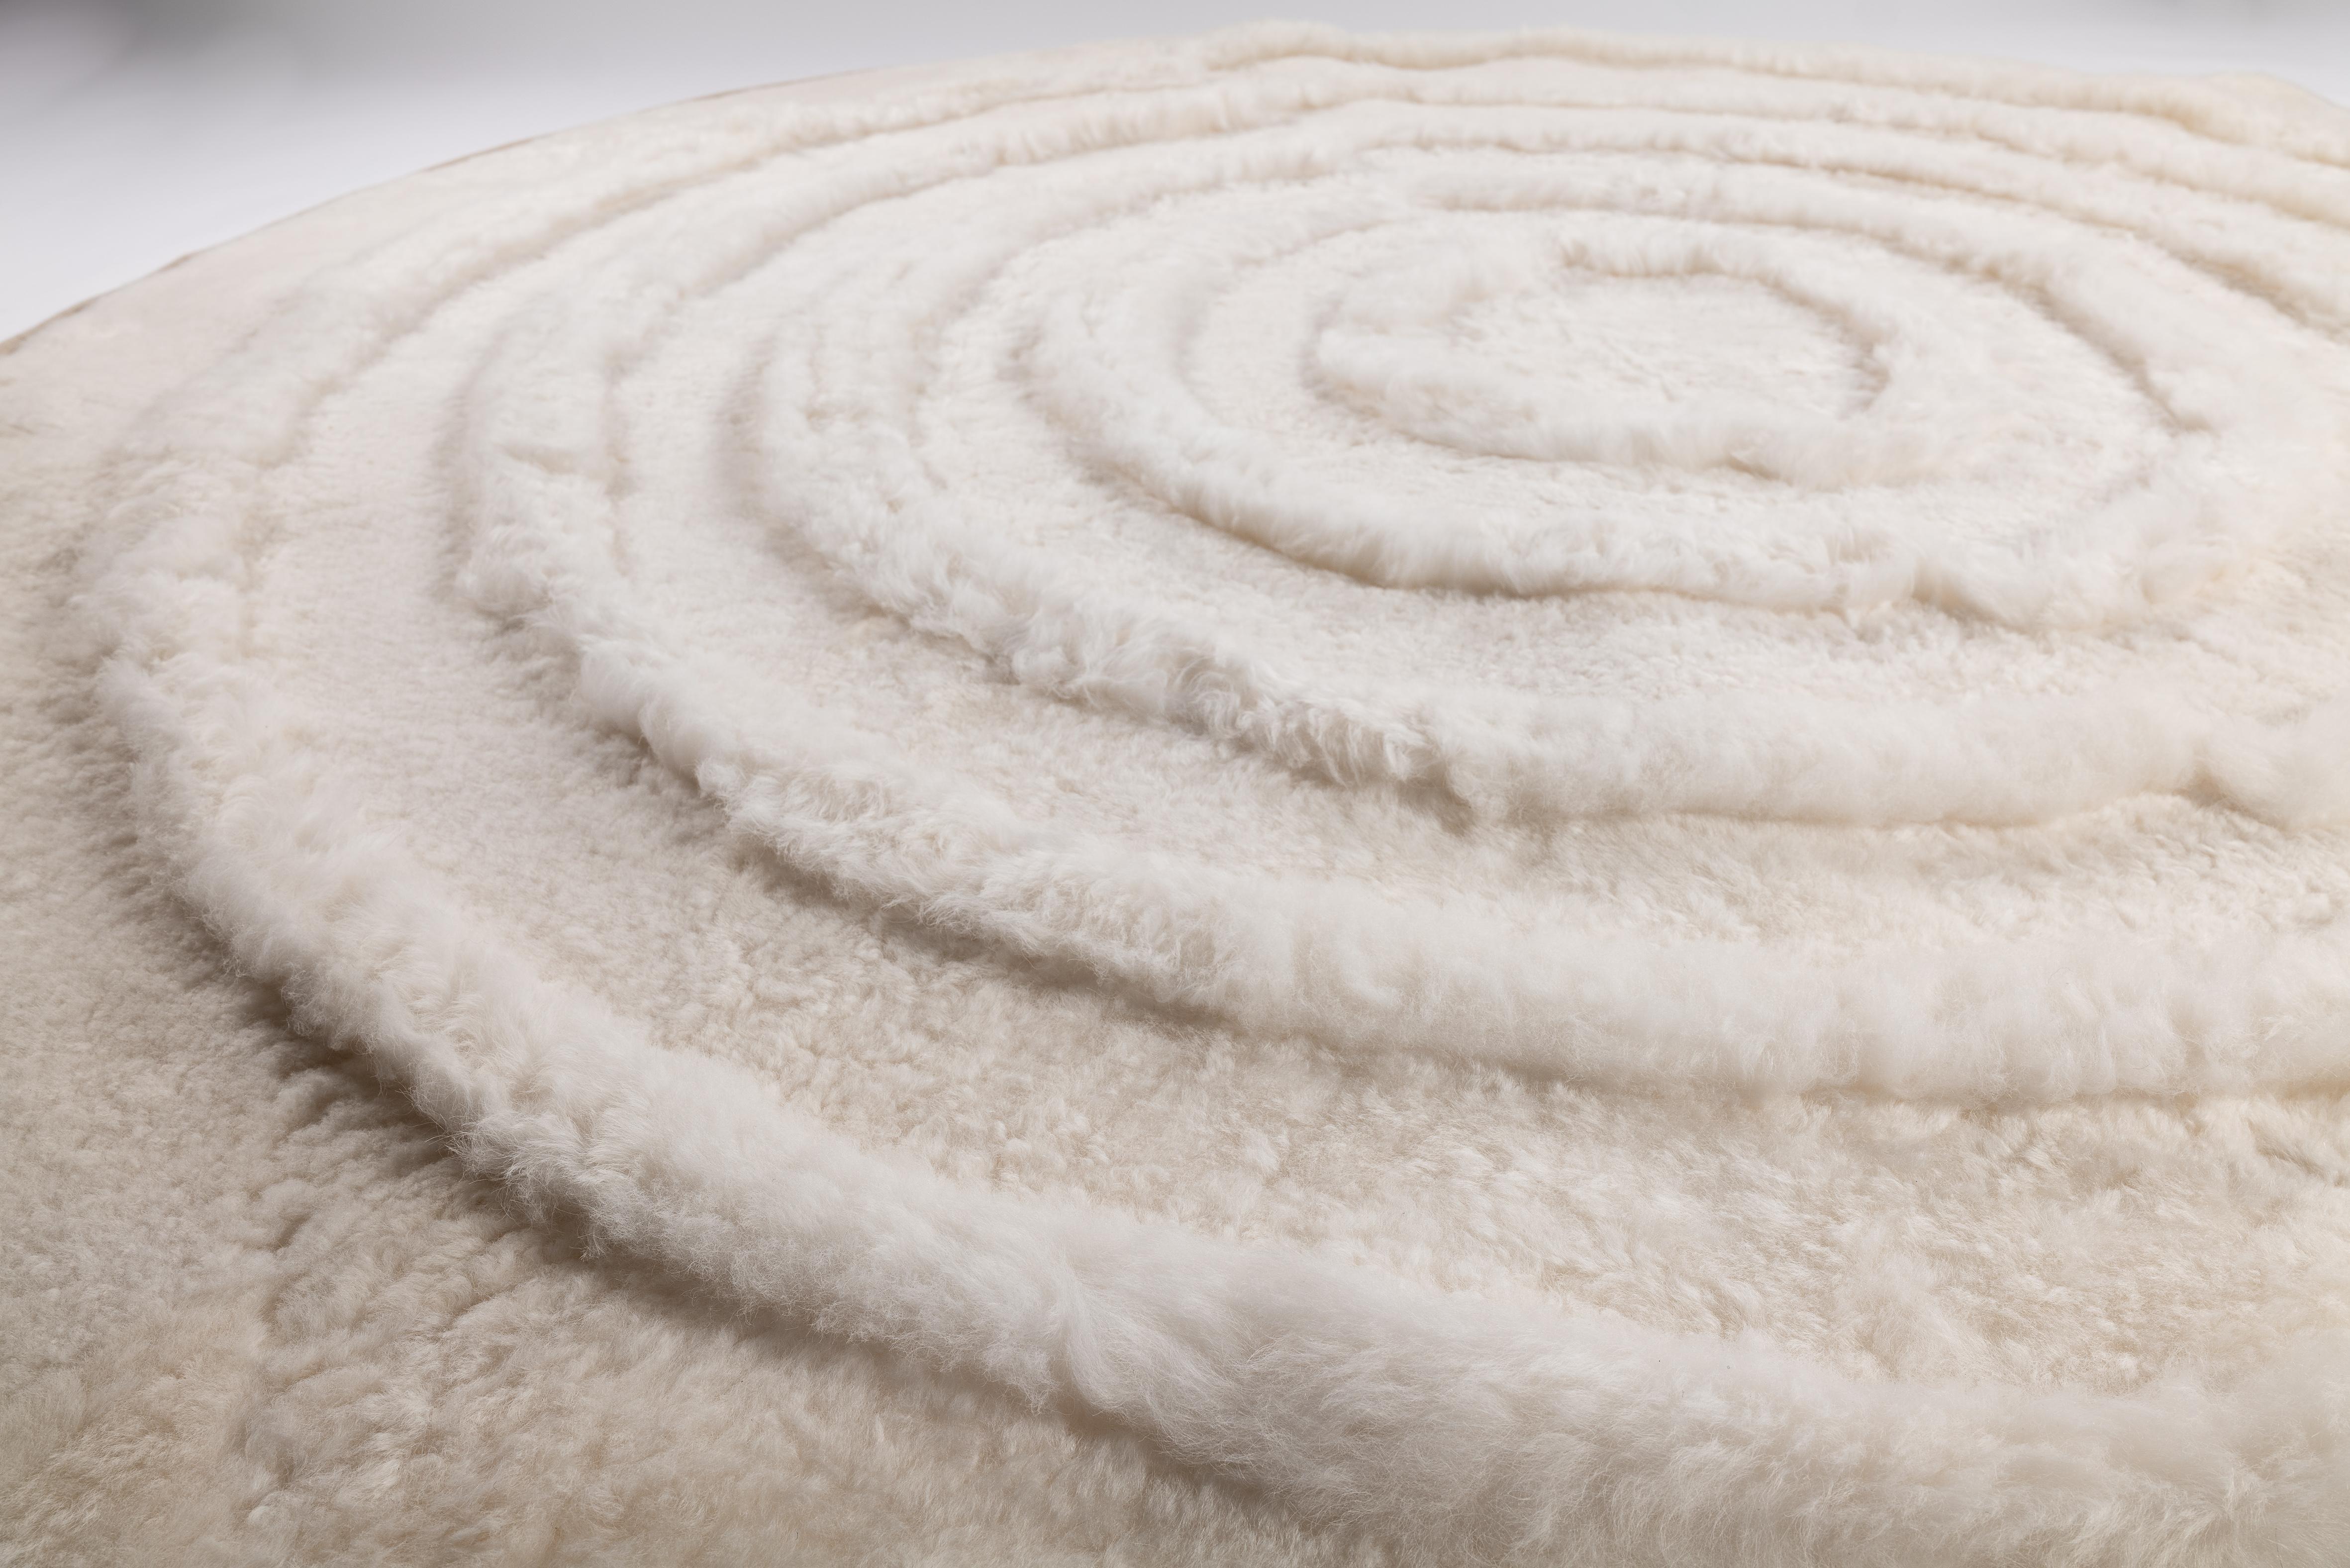 Our Eupraxia rug is a wonderful piece : every element exceptionally placed, every seam thoroughly inspected, and every inch intricately examined.
Handmade in France in our warehouse, our Creations redefined how lambskin can be used in custom